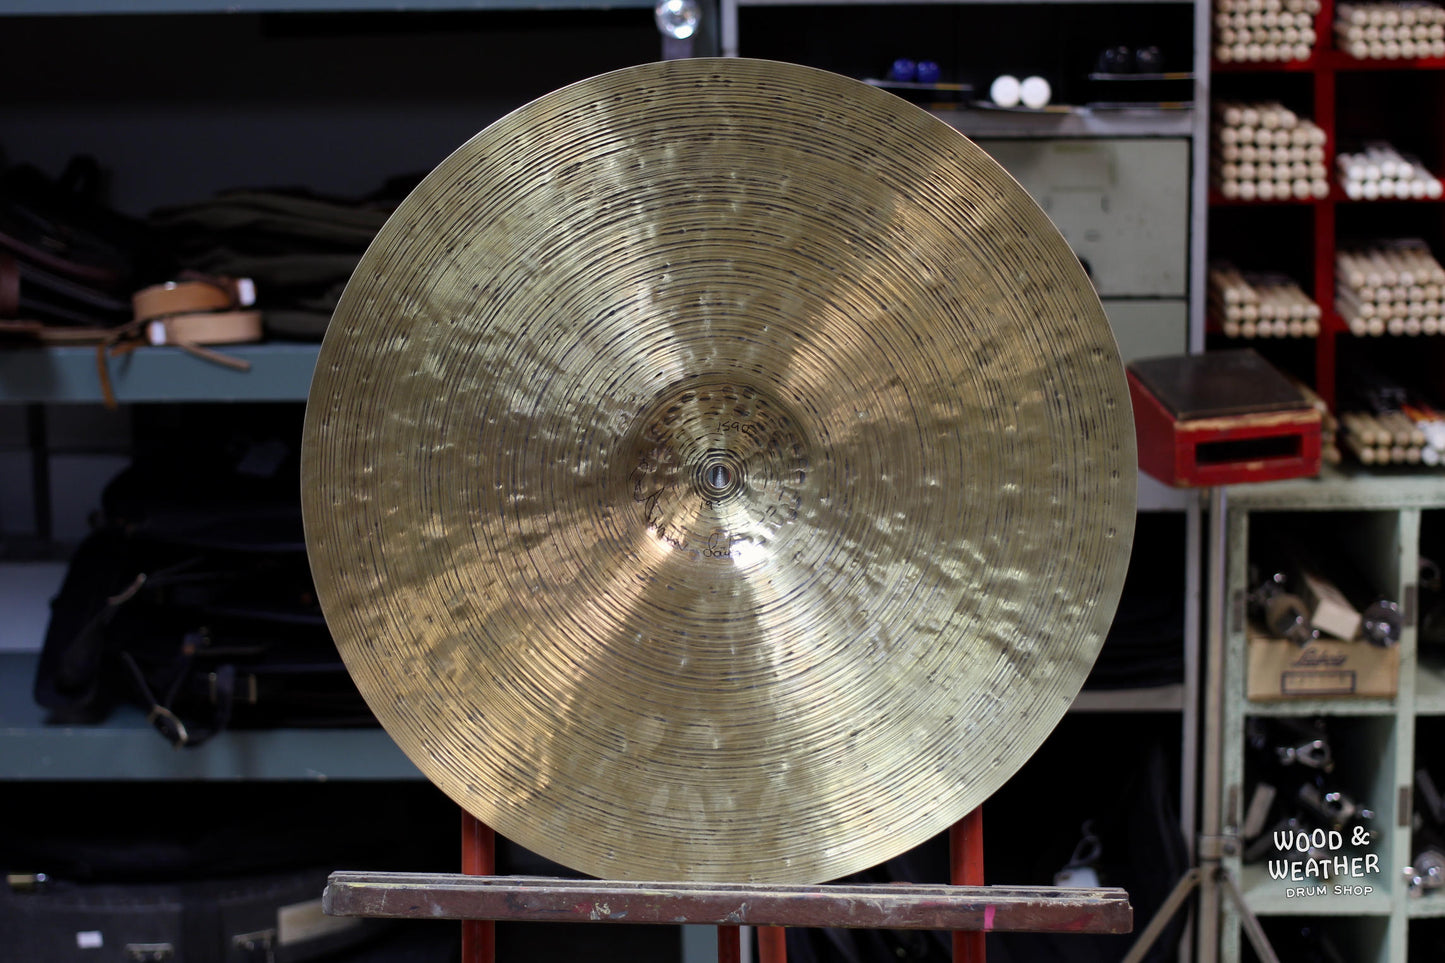 Used Istanbul Agop 19" 30th Anniversary Crash Ride Cymbal 1590g